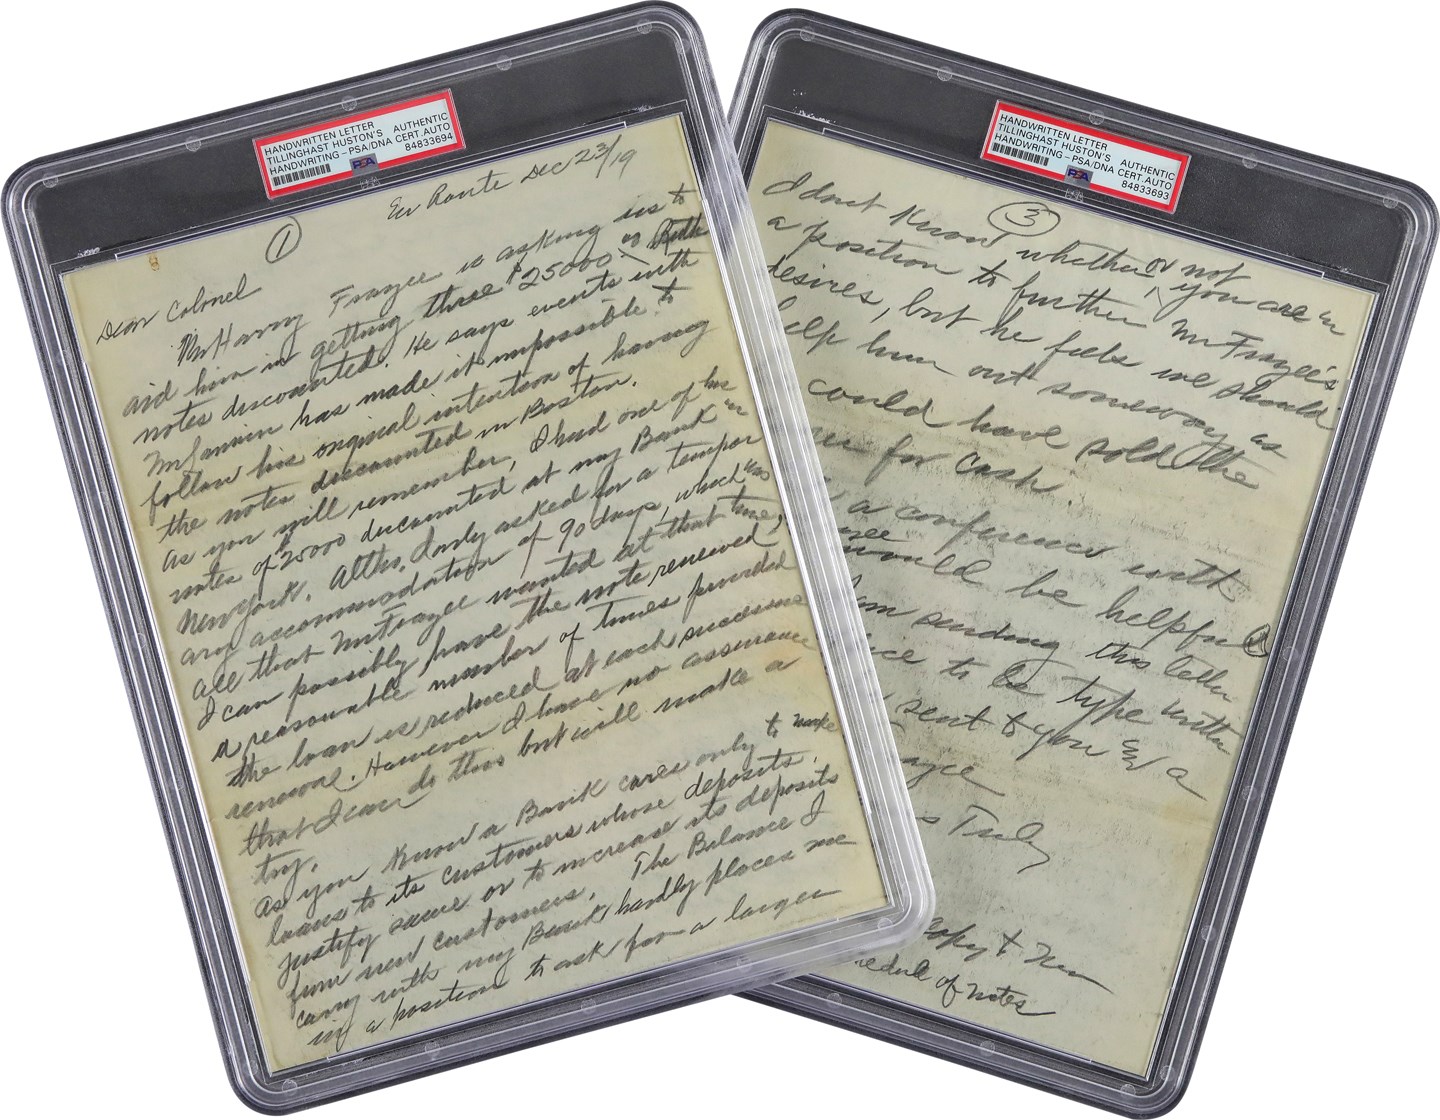 The Babe Ruth Sale Archive - February 25, 1920, Colonel Tillinghast Huston Handwritten Letter to Jacob Ruppert Regarding The Sale of Babe Ruth - From The Barry Halper Collection (PSA)